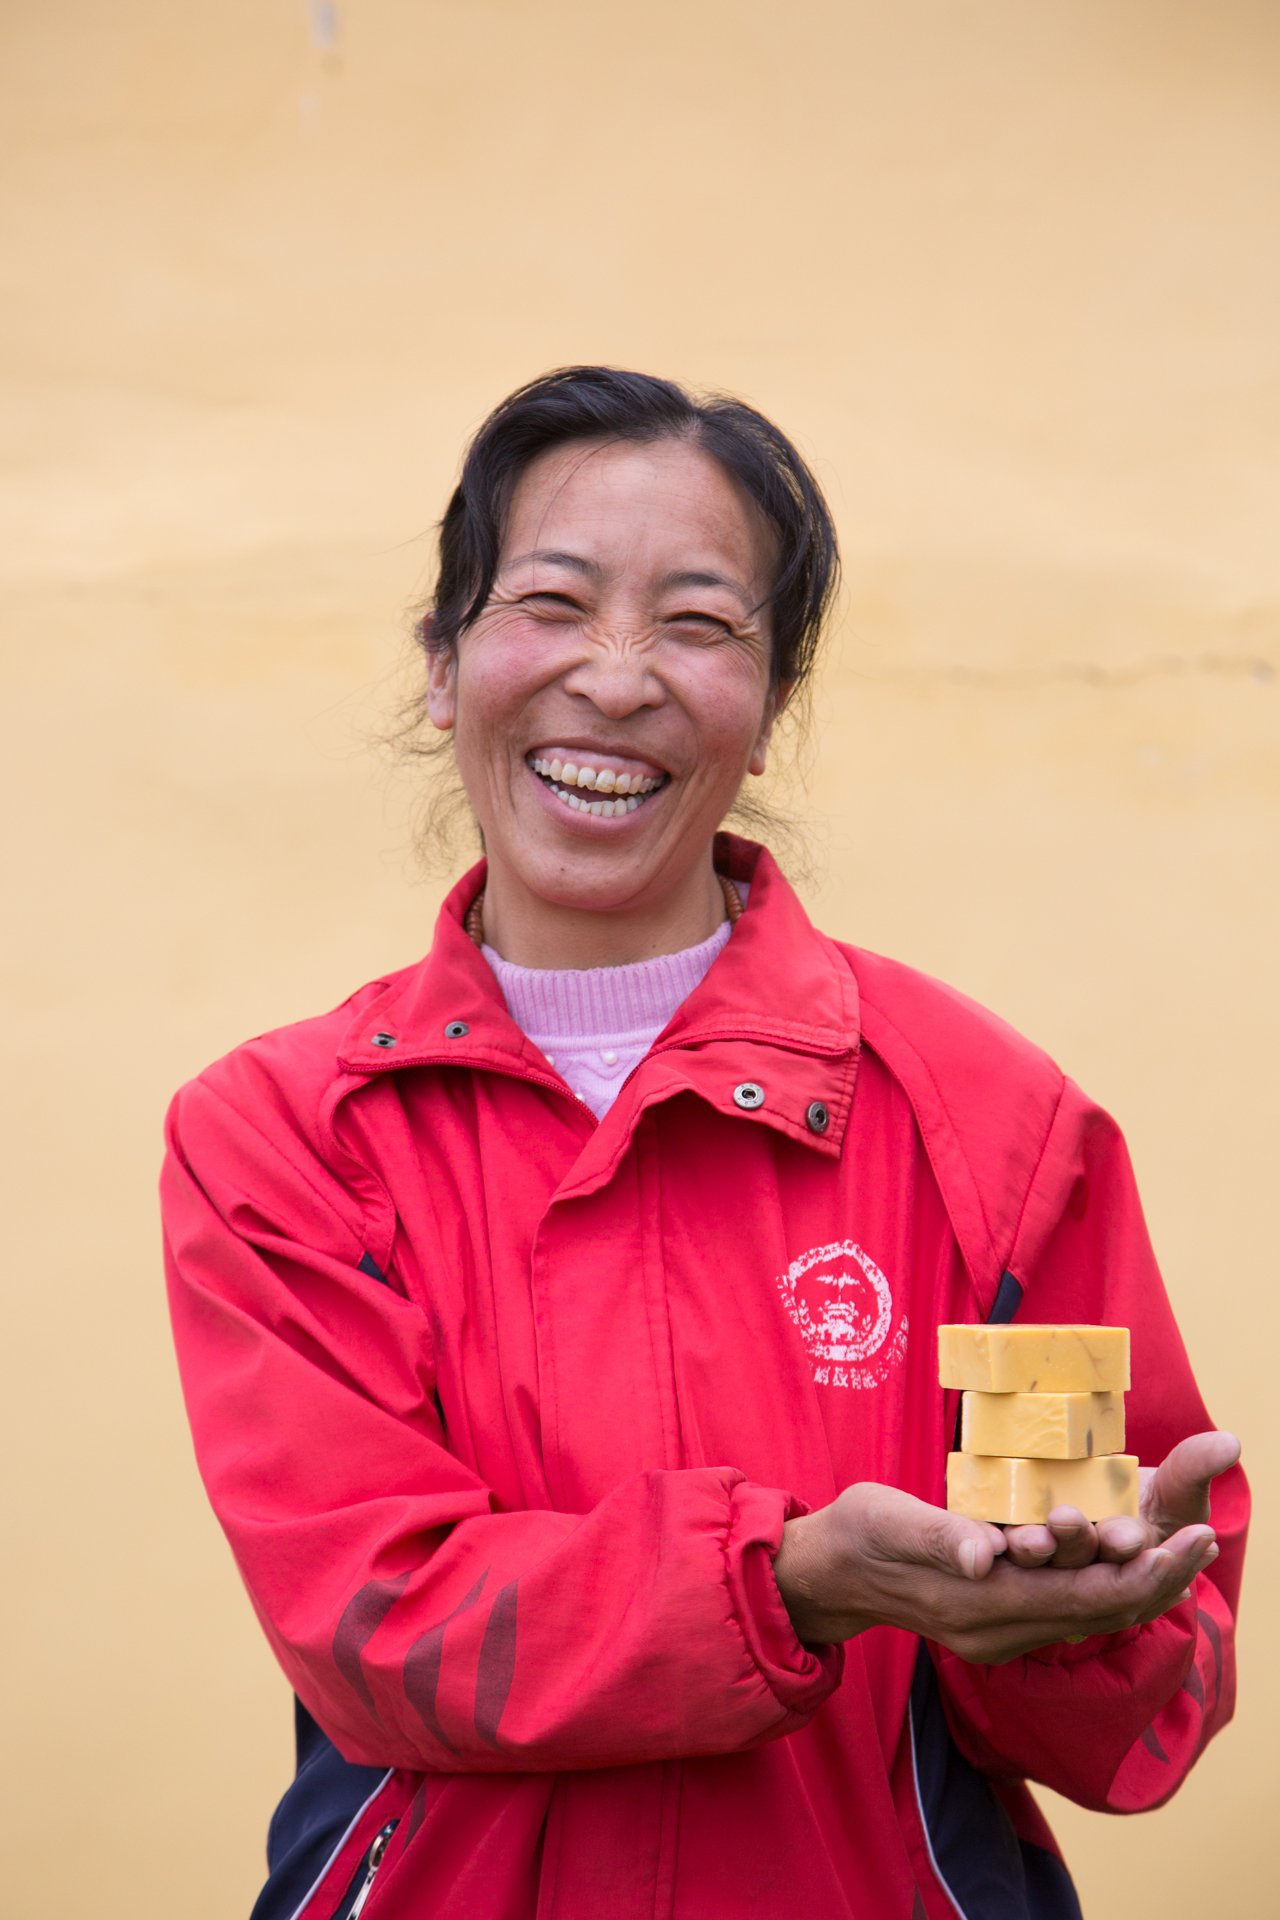  Yakma is a handmade, all-natural yak milk soap made by women of the Tibetan plateau. The social enterprise gives women an opportunity for economic independence and aims to build a safe and supportive environment for them.  July 2019. // Shot for Yak